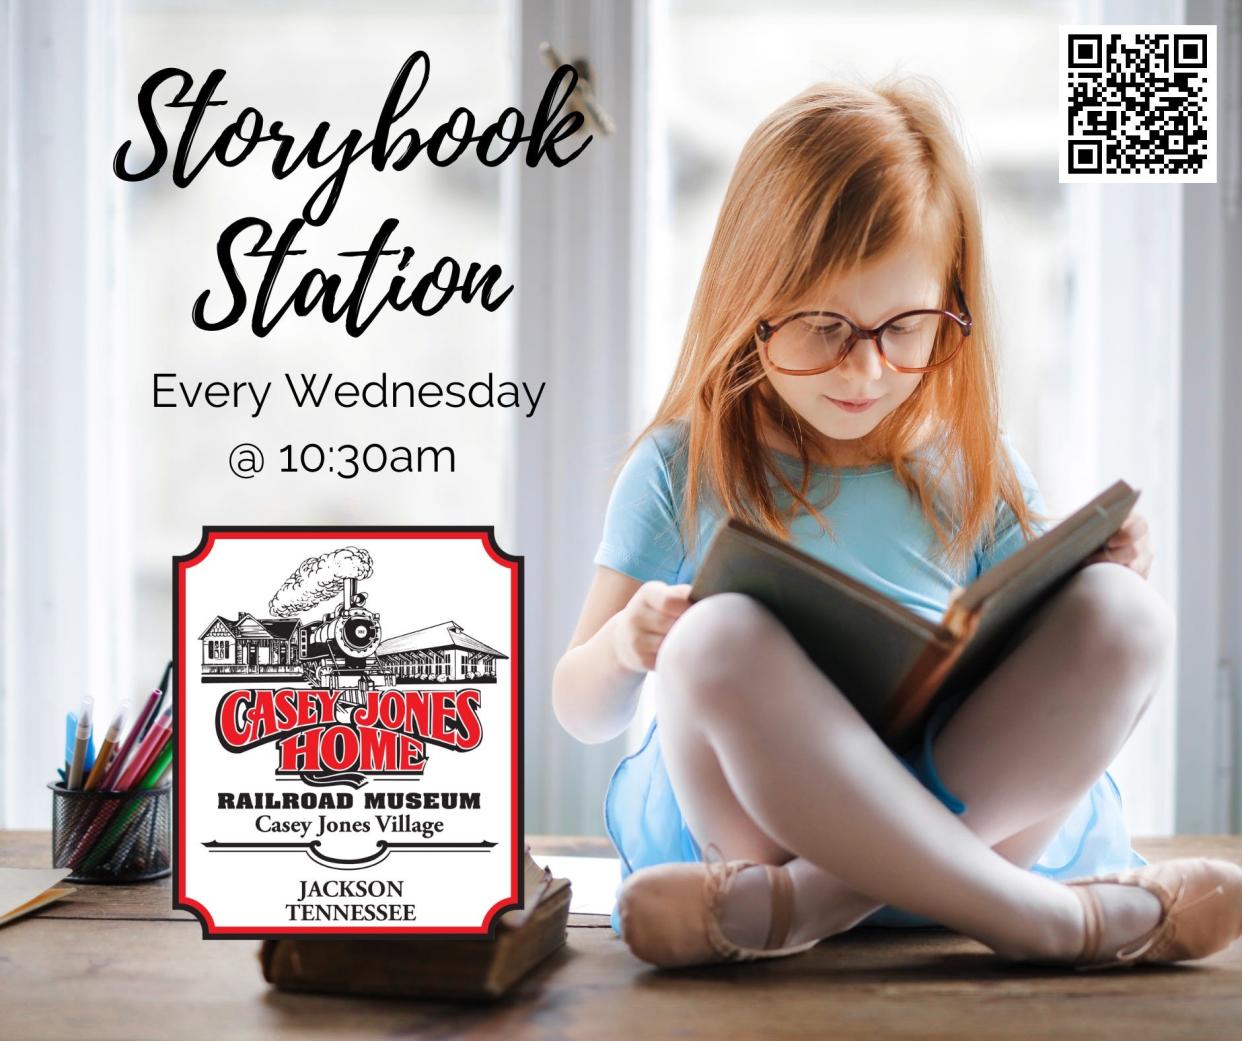 Storybook Station is held every Wednesday at 10:30 a.m.